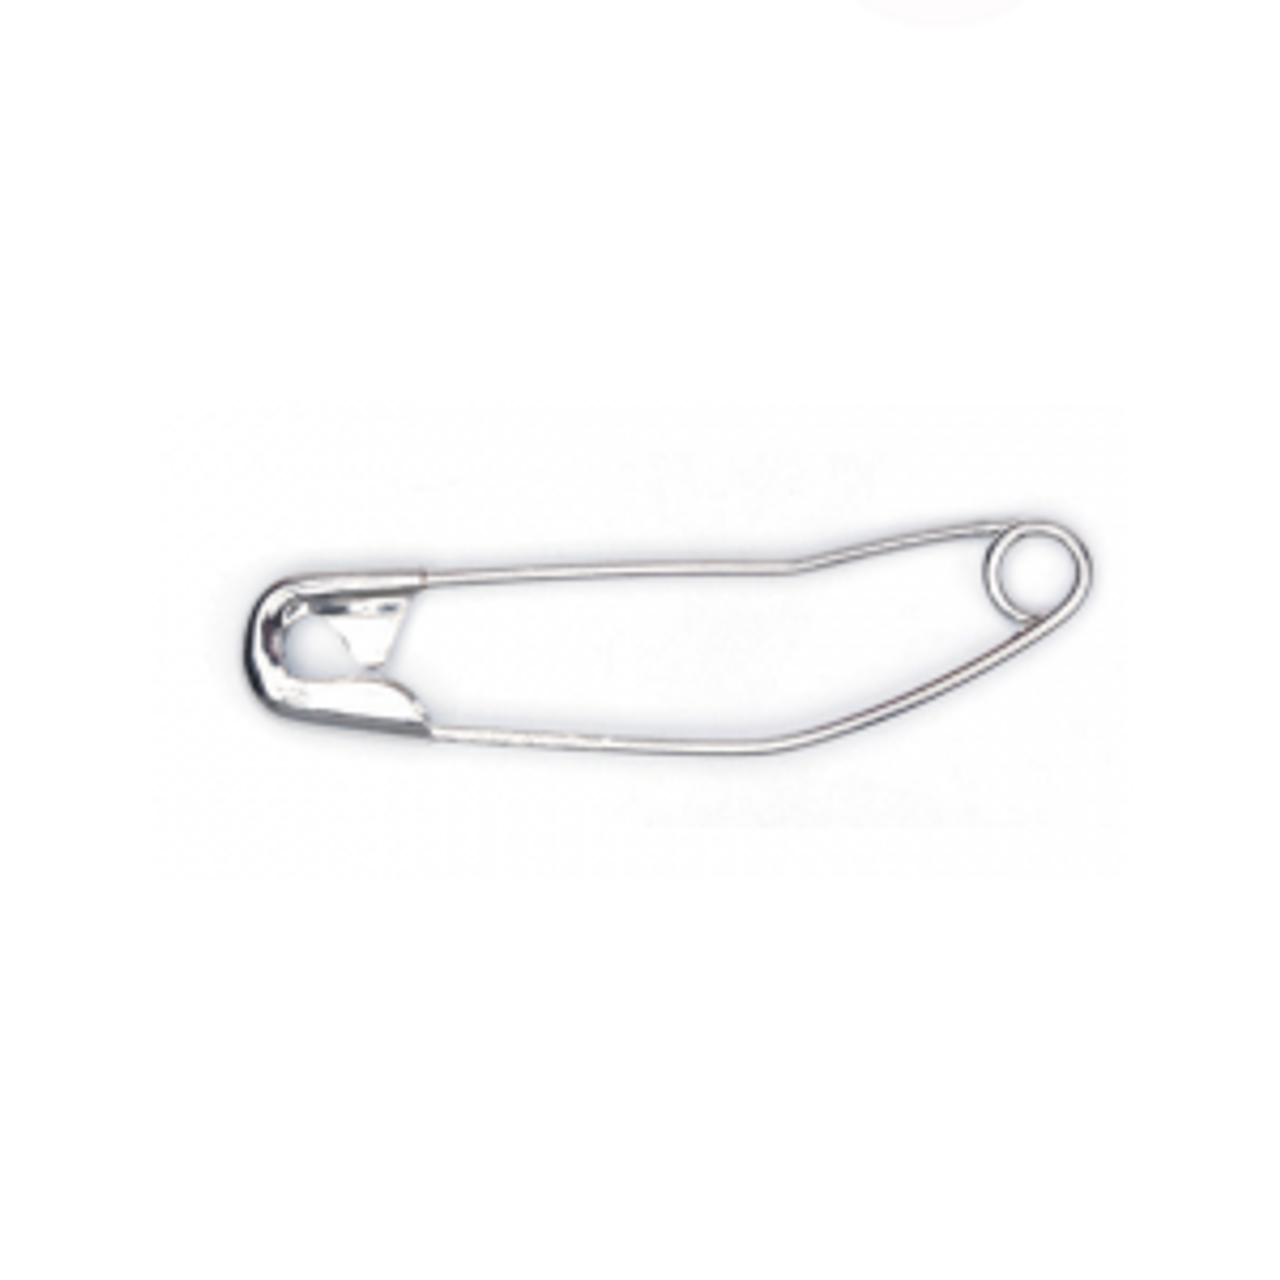 Single Basting Pin (Curved Safety Pins) by Hemline 38mm